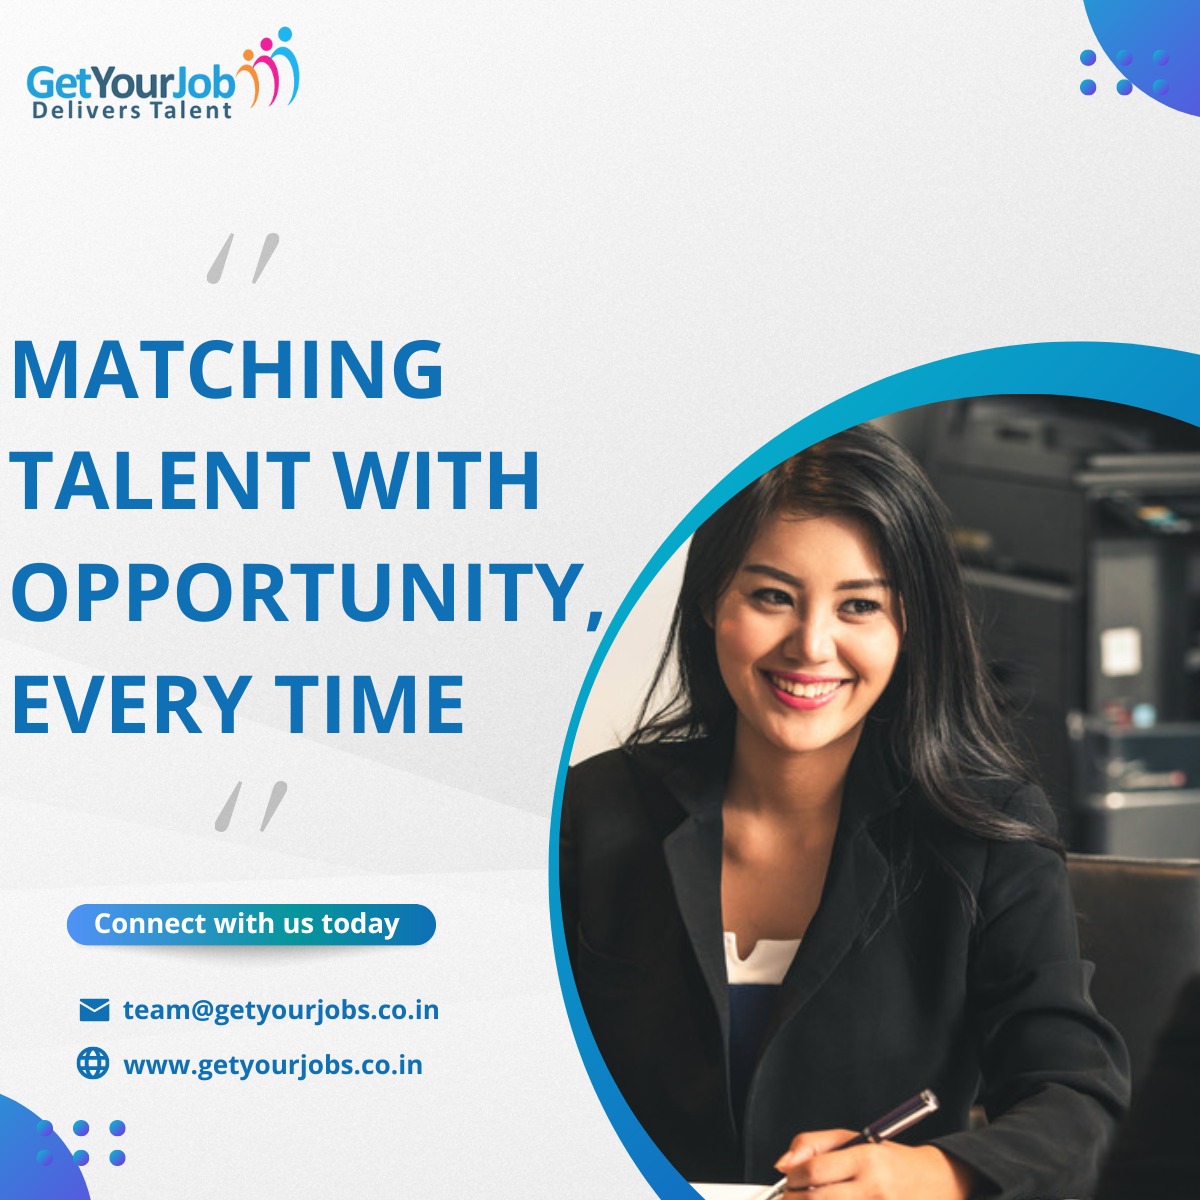 At GetYourJob, we pride ourselves on our ability to identify and connect the best candidates with their dream jobs, using innovative recruitment techniques and domain expertise. 

#hiring #job #recruitment #recuritmentchallenges #technologyrecruitment #techhiring